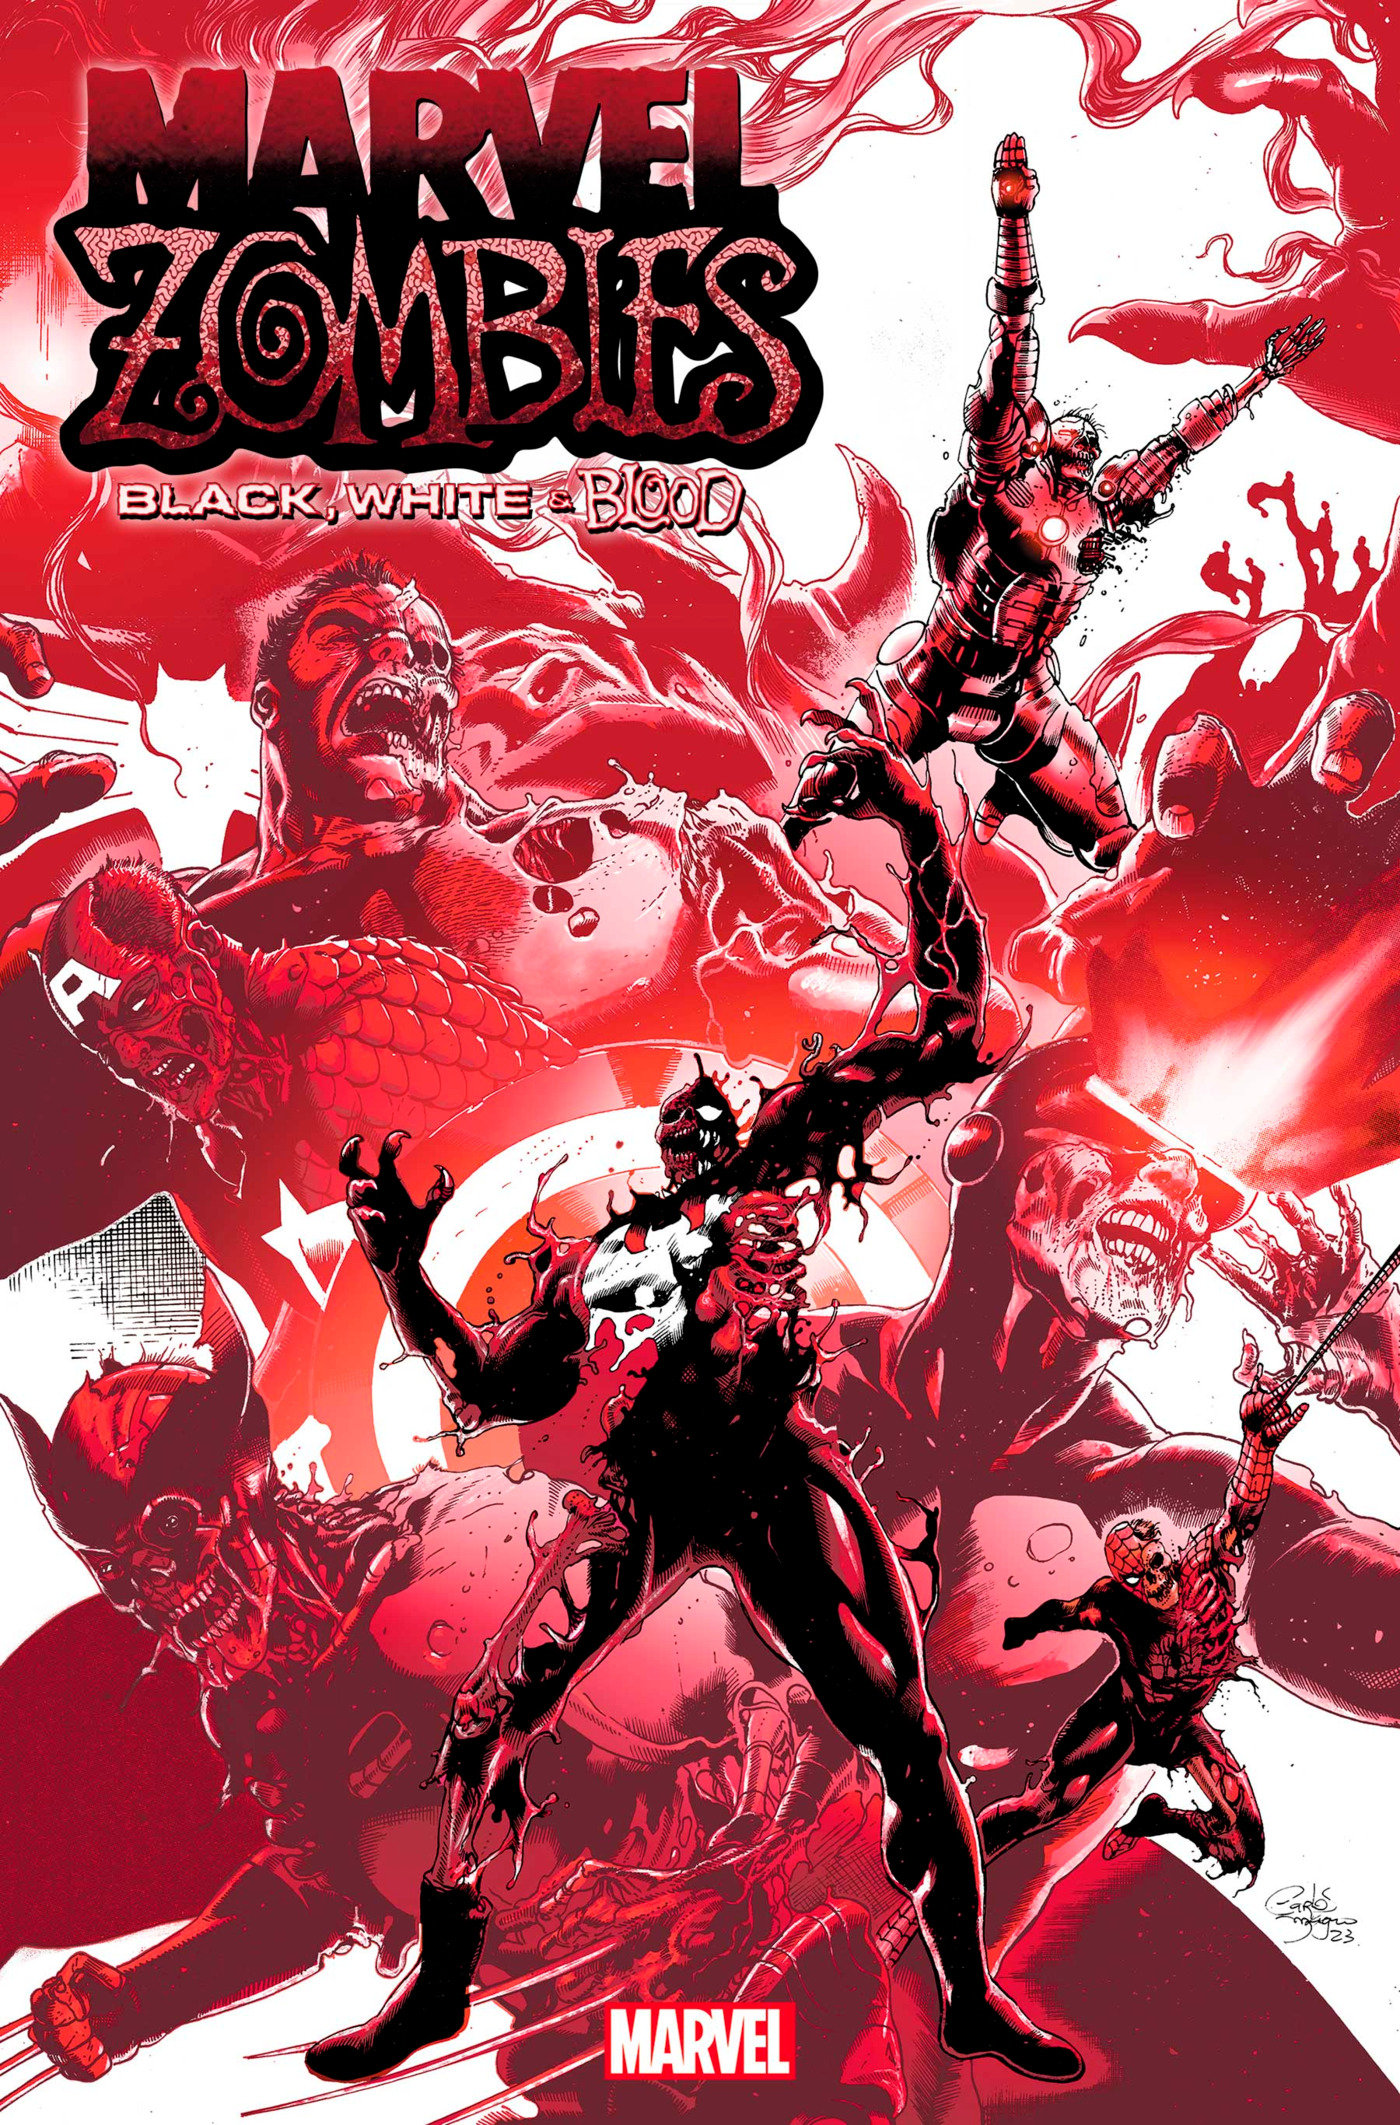 Marvel Zombies Black, White & Blood #1 Carlos Magno Homage Variant 1 for 10 Incentive